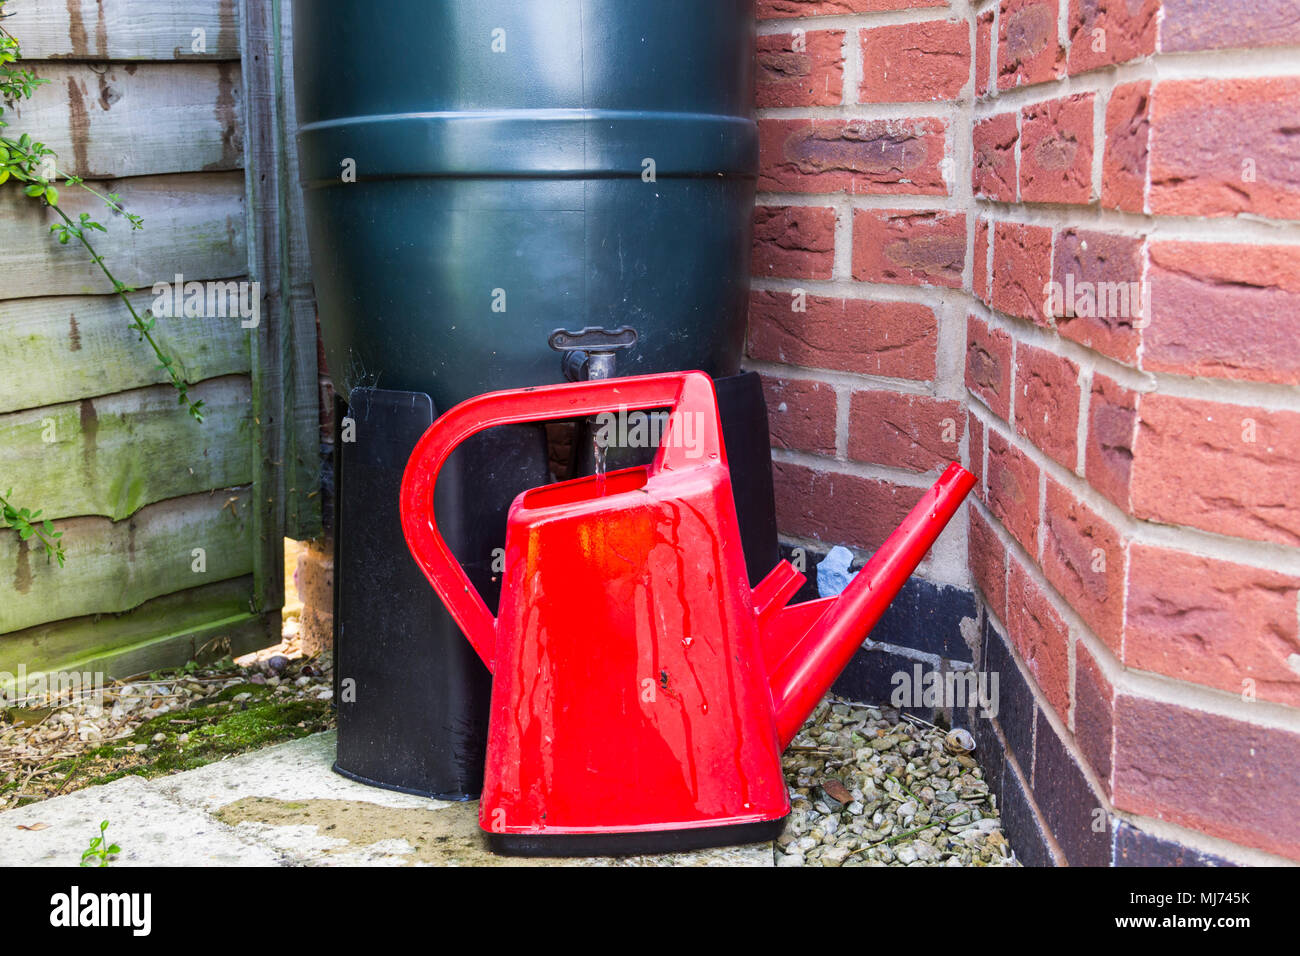 Filling a red watering can from an Environment-friendly Ward Strata slimline water butt installed at the bottom of a downspout of a house in the UK. Stock Photo